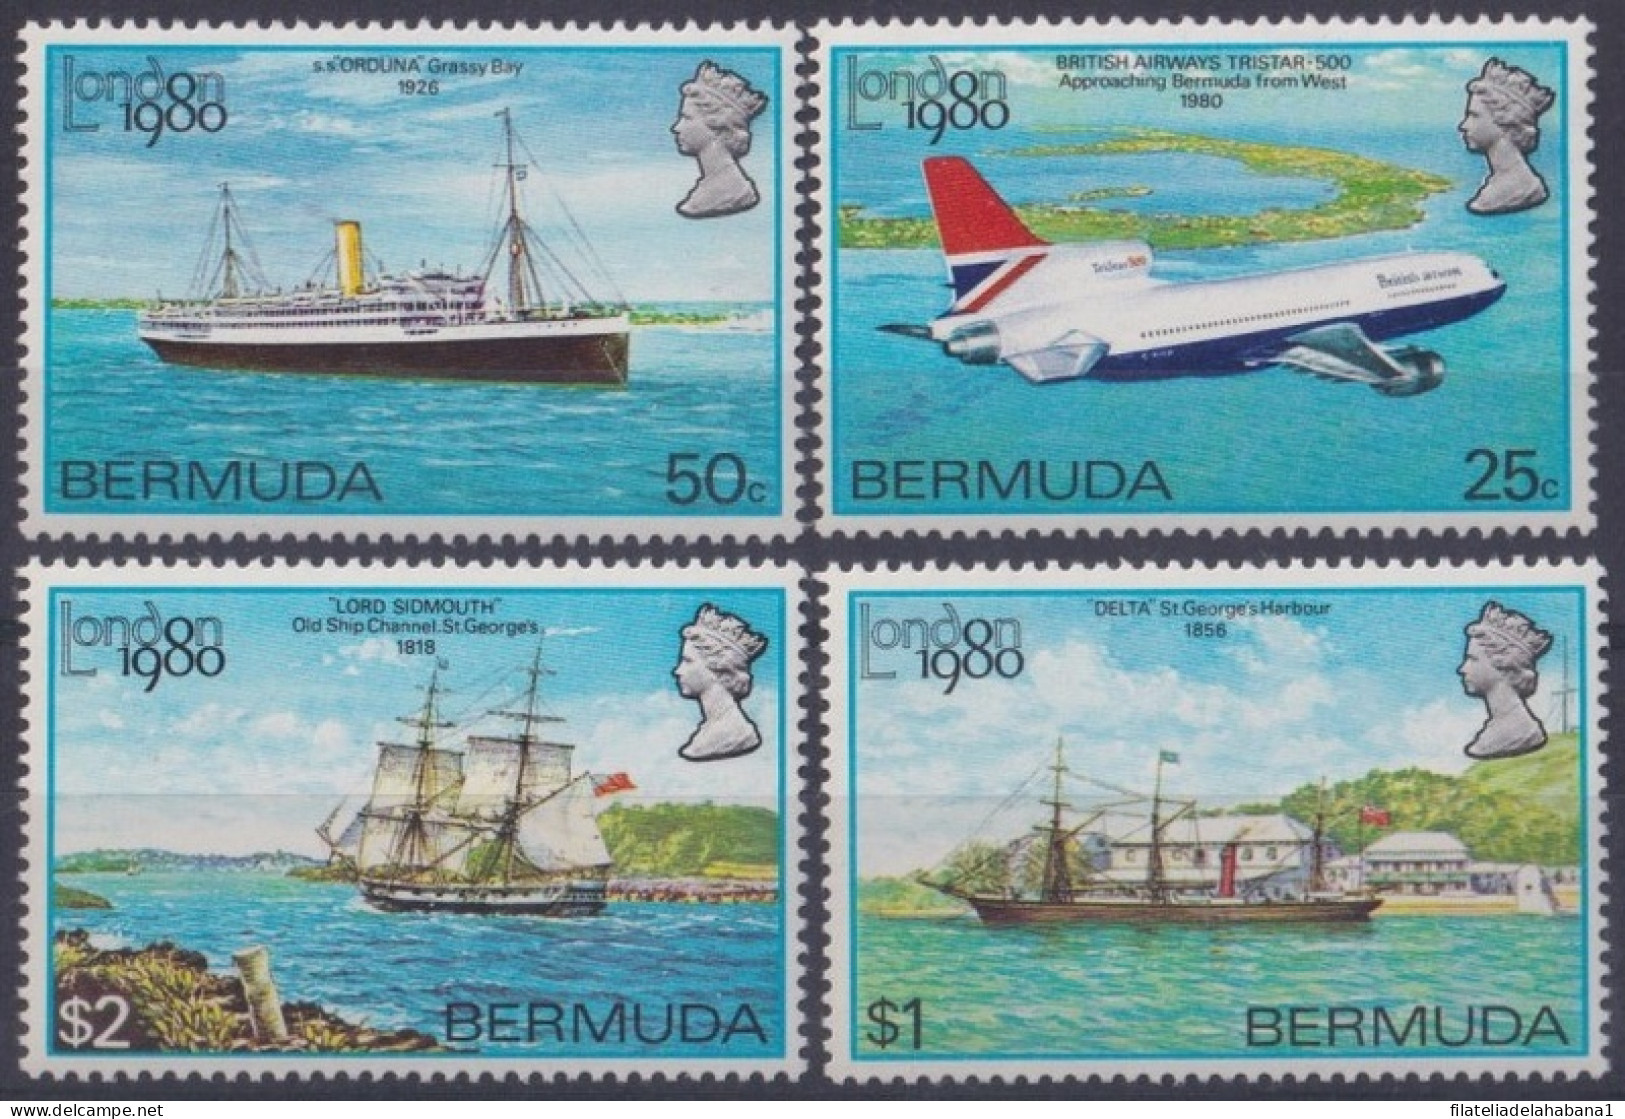 F-EX49865 BERMUDA IS MNH 1980 LONDON EXPO AIRPLANE SHIP BARCOS BOAT.  - Ships